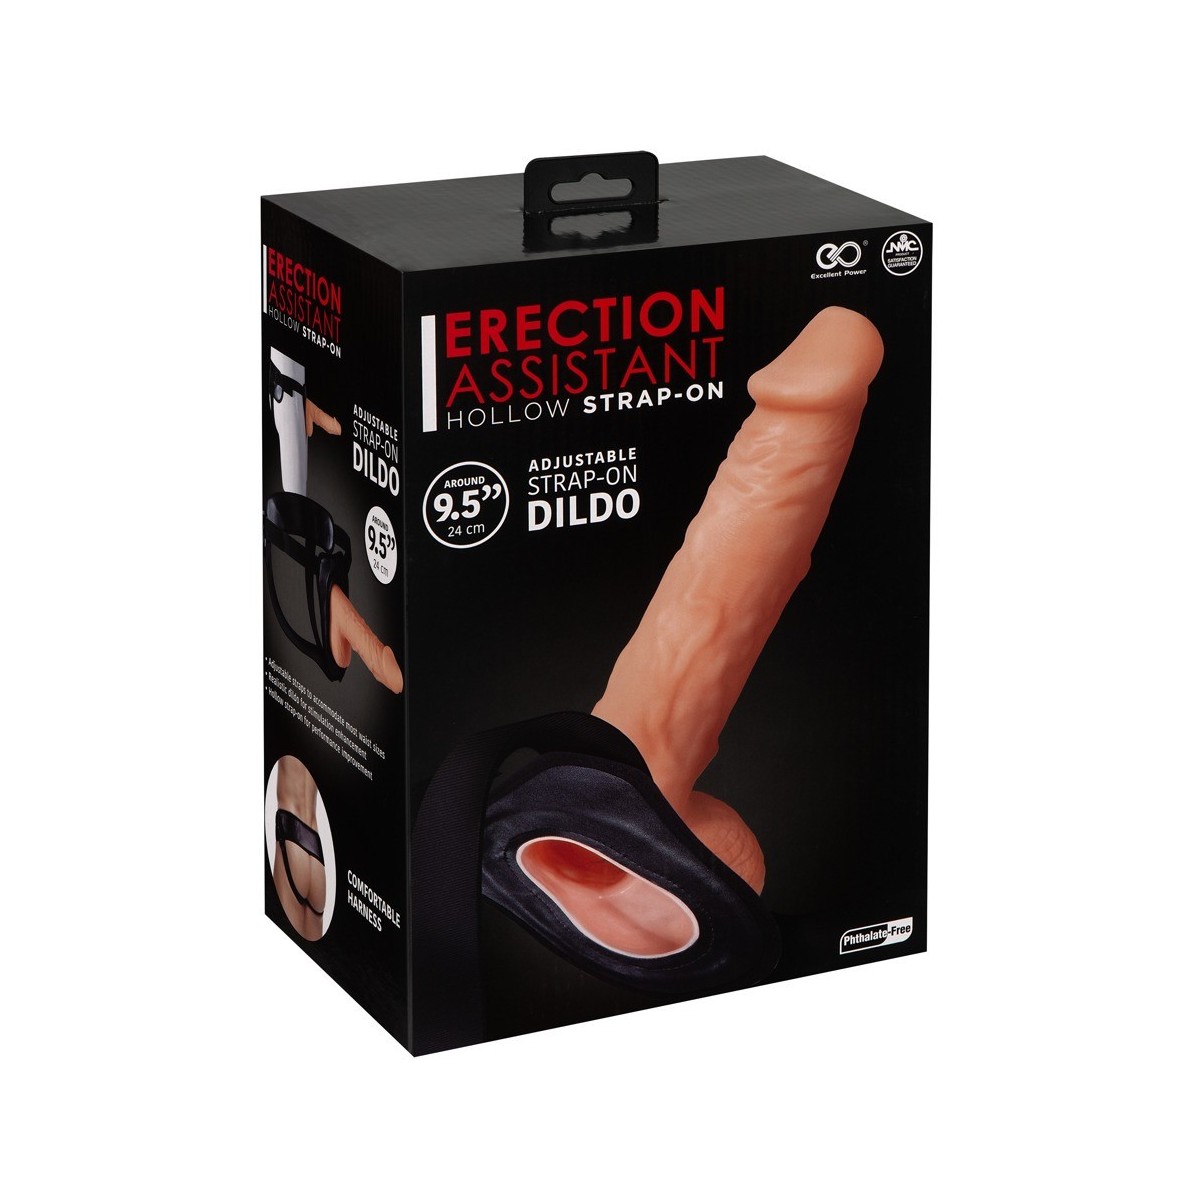 fallo indossible Erection Assistant Hollow Strap-On